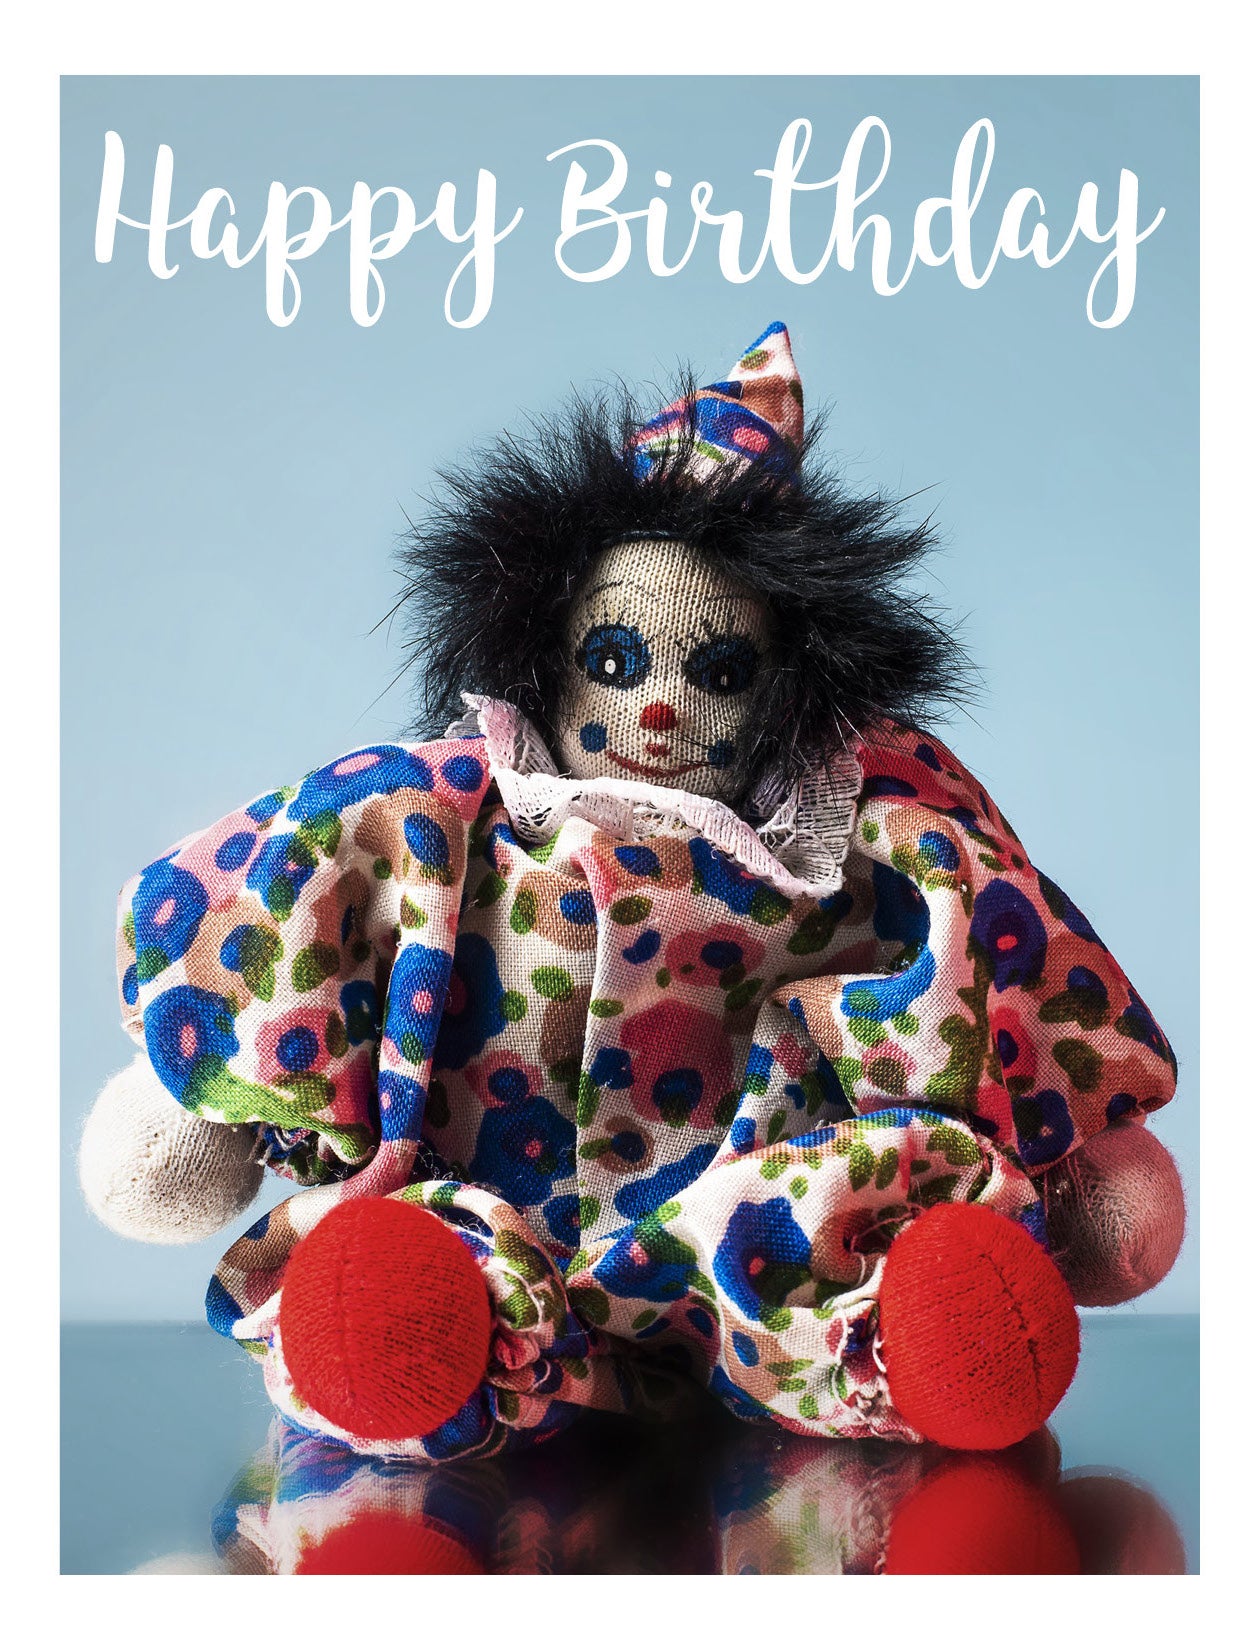 The Happy Birthday Creepy Clown Card – Greeting Cards for Assholes